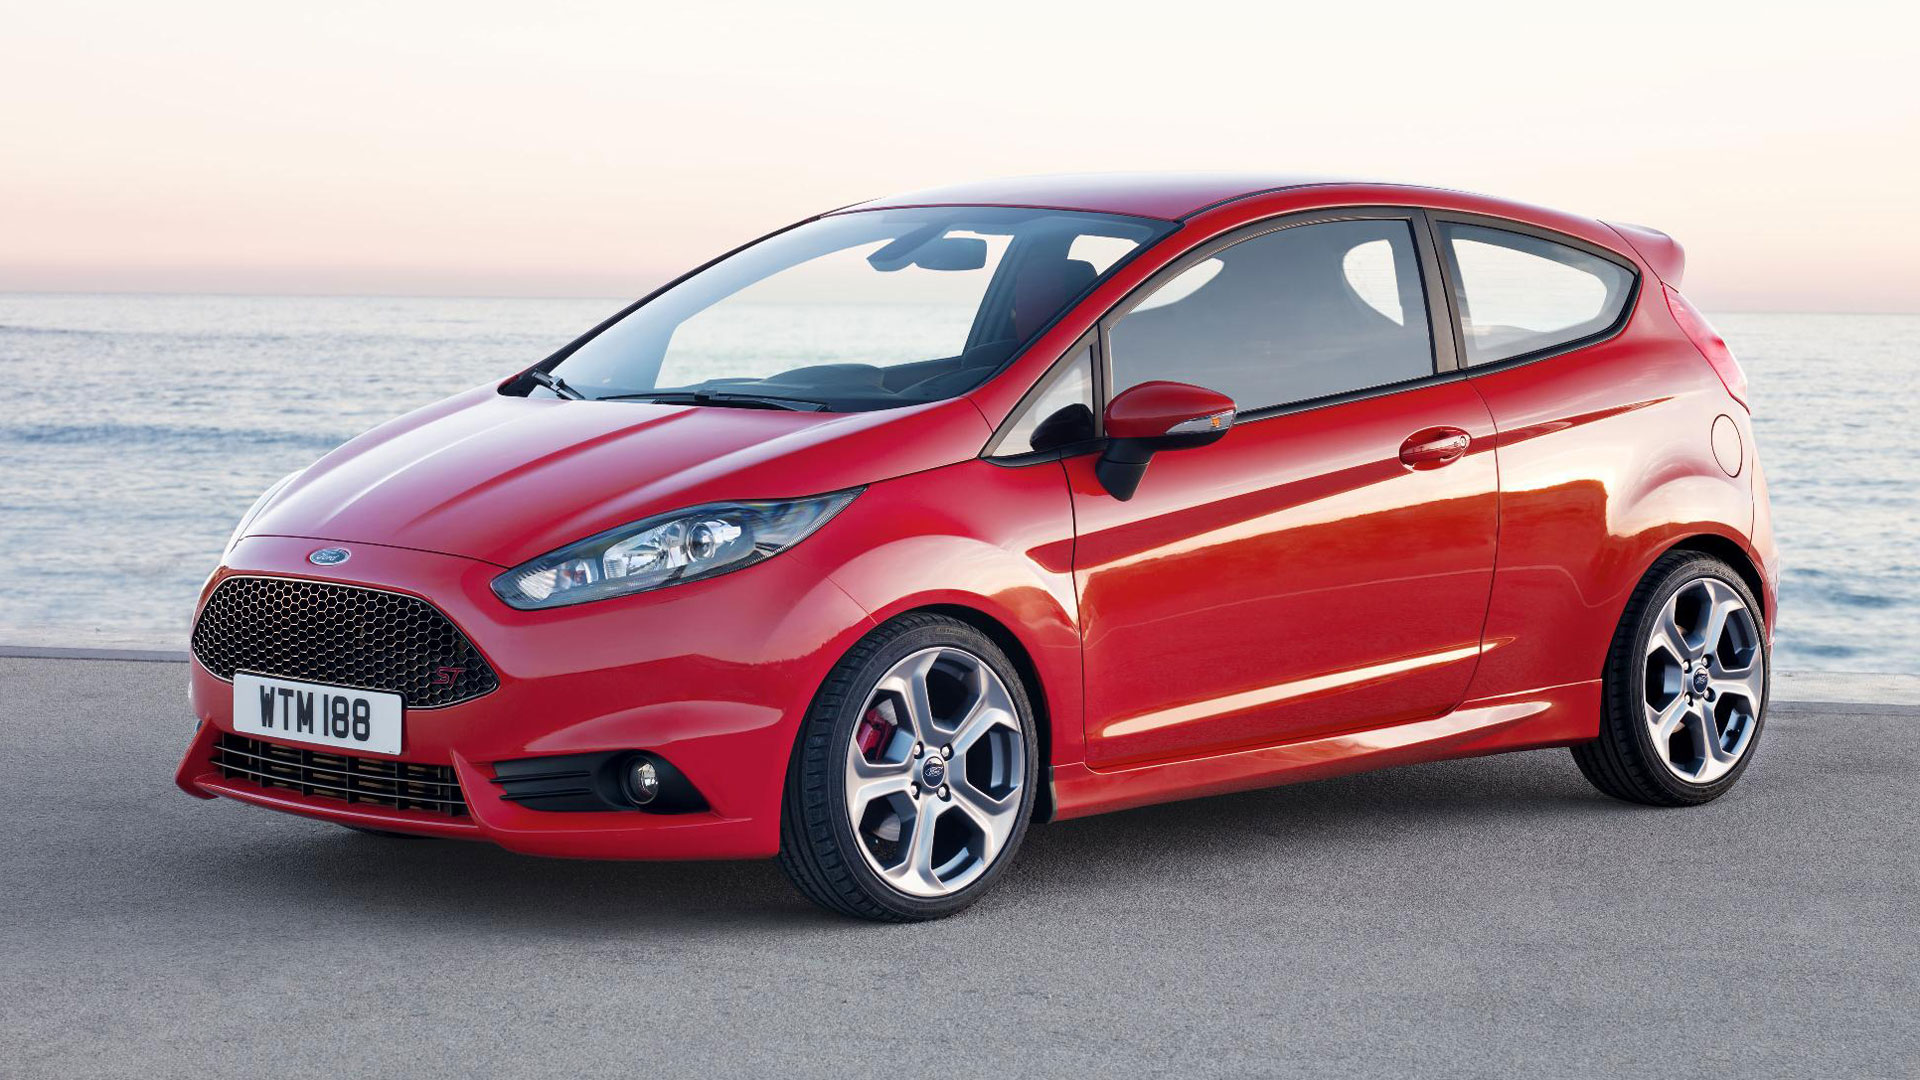 Ford Fiesta ST - greatest cars of the decade